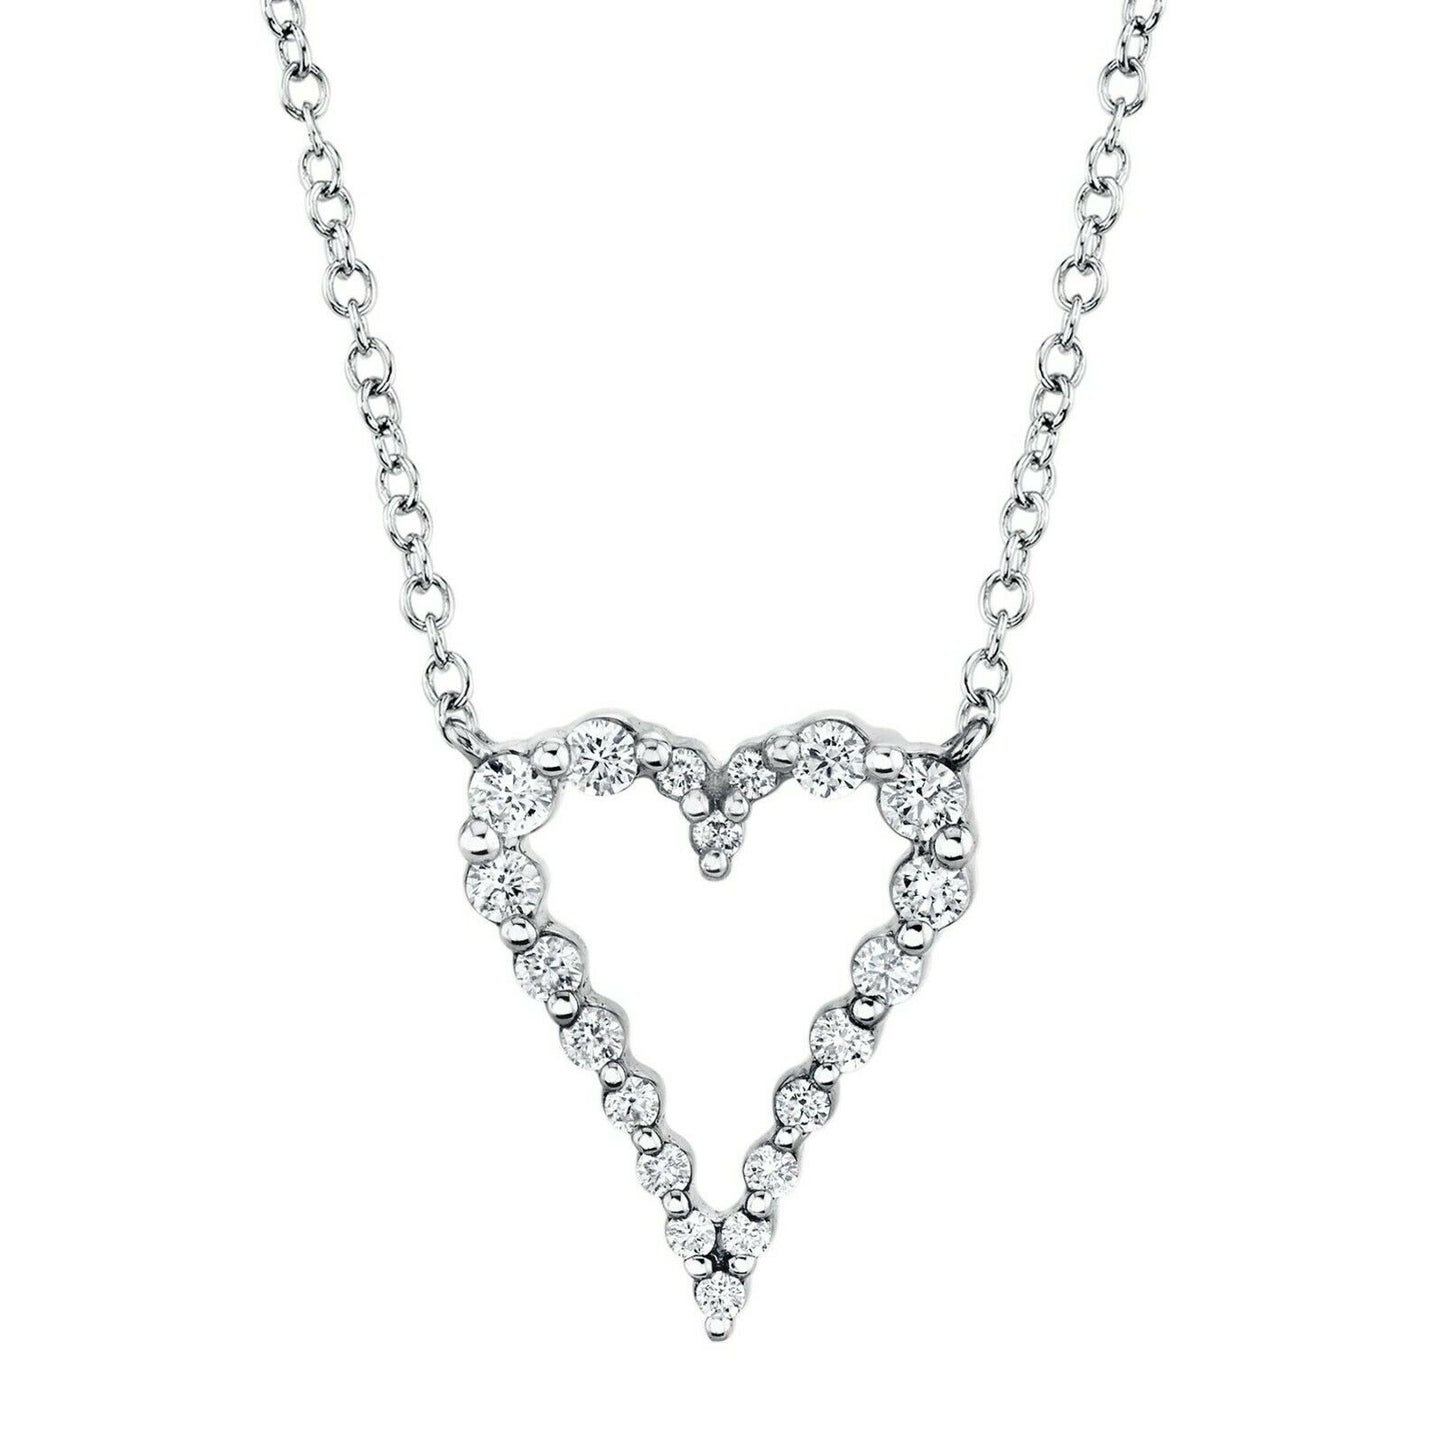 Floating Diamond Heart Pendant Necklace 14K White Gold 0.26CT Round Cut Natural